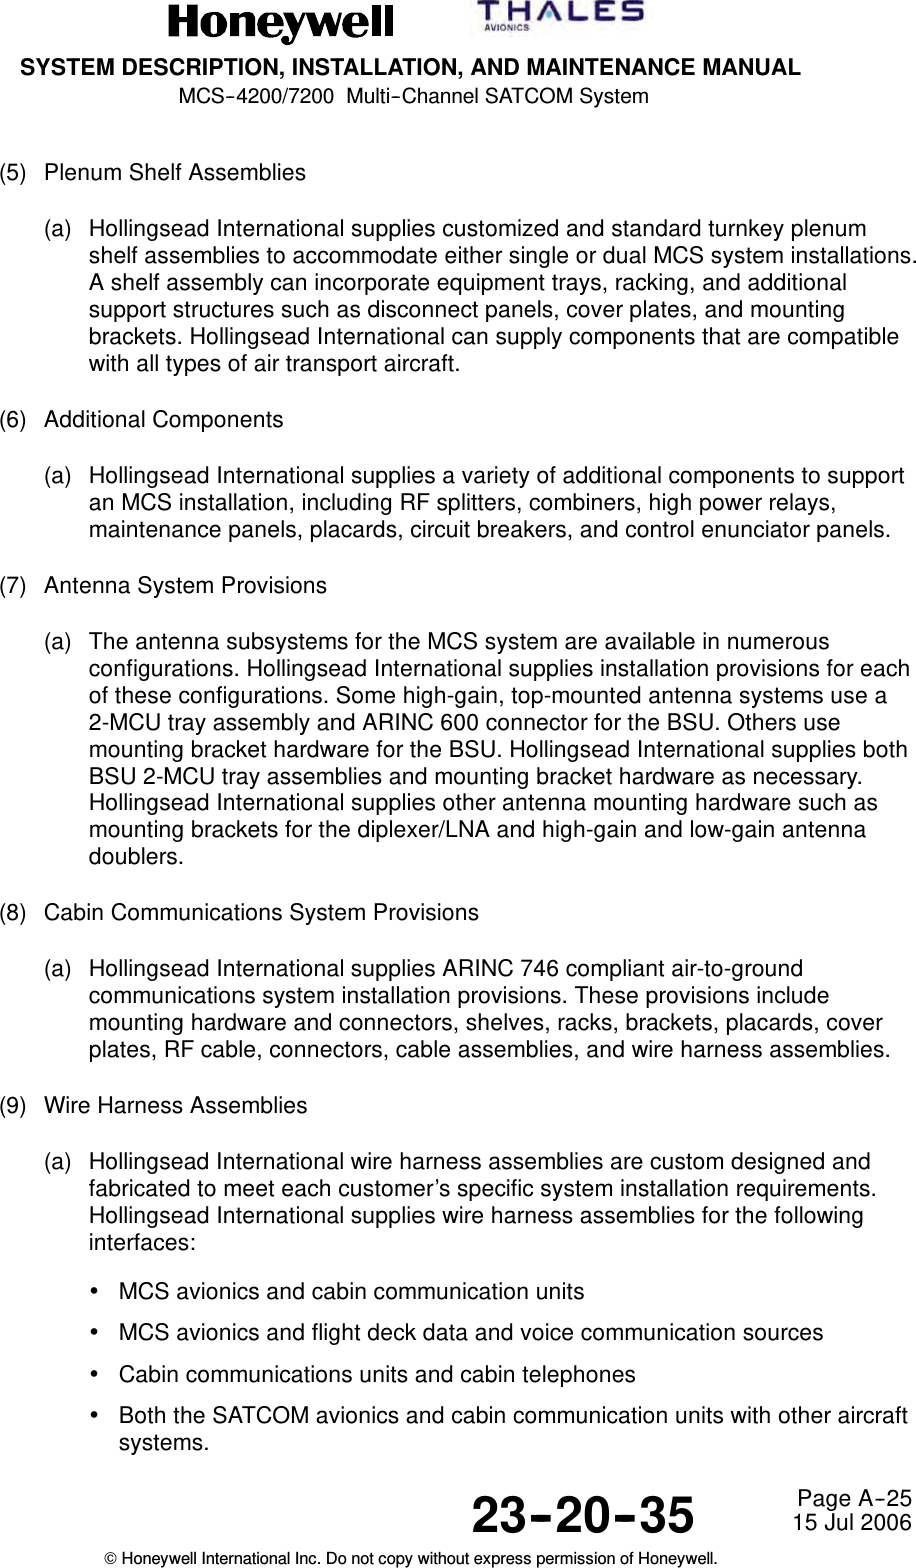 SYSTEM DESCRIPTION, INSTALLATION, AND MAINTENANCE MANUALMCS--4200/7200 Multi--Channel SATCOM System23--20--35 15 Jul 2006Honeywell International Inc. Do not copy without express permission of Honeywell.Page A--25(5) Plenum Shelf Assemblies(a) Hollingsead International supplies customized and standard turnkey plenumshelf assemblies to accommodate either single or dual MCS system installations.A shelf assembly can incorporate equipment trays, racking, and additionalsupport structures such as disconnect panels, cover plates, and mountingbrackets. Hollingsead International can supply components that are compatiblewith all types of air transport aircraft.(6) Additional Components(a) Hollingsead International supplies a variety of additional components to supportan MCS installation, including RF splitters, combiners, high power relays,maintenance panels, placards, circuit breakers, and control enunciator panels.(7) Antenna System Provisions(a) The antenna subsystems for the MCS system are available in numerousconfigurations. Hollingsead International supplies installation provisions for eachof these configurations. Some high-gain, top-mounted antenna systems use a2-MCU tray assembly and ARINC 600 connector for the BSU. Others usemounting bracket hardware for the BSU. Hollingsead International supplies bothBSU 2-MCU tray assemblies and mounting bracket hardware as necessary.Hollingsead International supplies other antenna mounting hardware such asmounting brackets for the diplexer/LNA and high-gain and low-gain antennadoublers.(8) Cabin Communications System Provisions(a) Hollingsead International supplies ARINC 746 compliant air-to-groundcommunications system installation provisions. These provisions includemounting hardware and connectors, shelves, racks, brackets, placards, coverplates, RF cable, connectors, cable assemblies, and wire harness assemblies.(9) Wire Harness Assemblies(a) Hollingsead International wire harness assemblies are custom designed andfabricated to meet each customer’s specific system installation requirements.Hollingsead International supplies wire harness assemblies for the followinginterfaces:•MCS avionics and cabin communication units•MCS avionics and flight deck data and voice communication sources•Cabin communications units and cabin telephones•Both the SATCOM avionics and cabin communication units with other aircraftsystems.